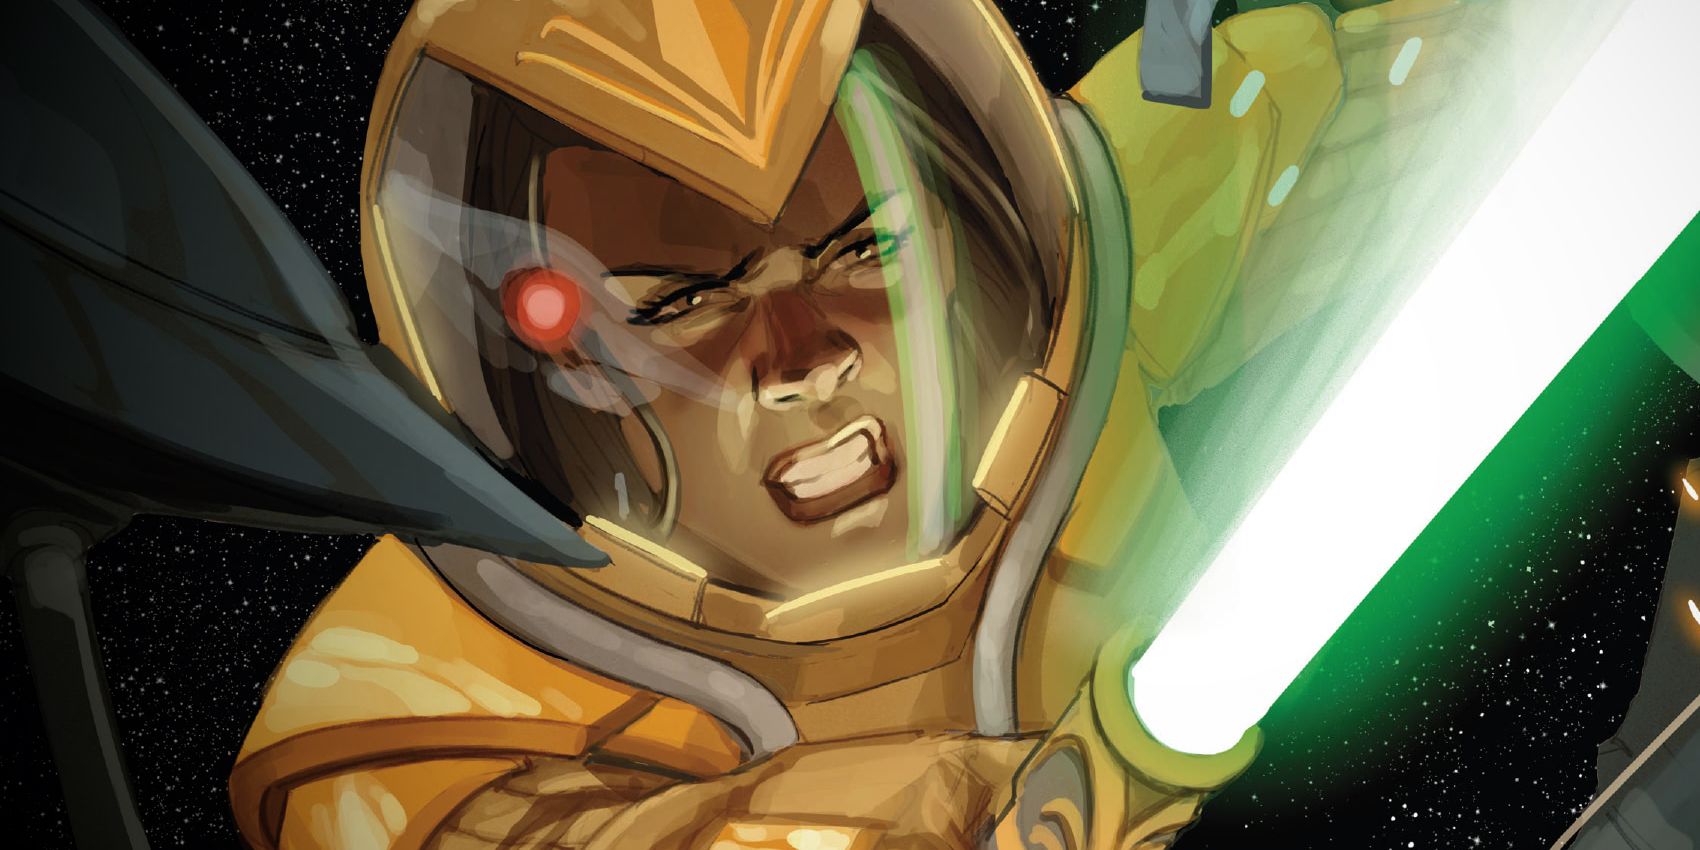 Keeve Trennis fighting in space in Star Wars: The High Republic #4 Comic Cover Art